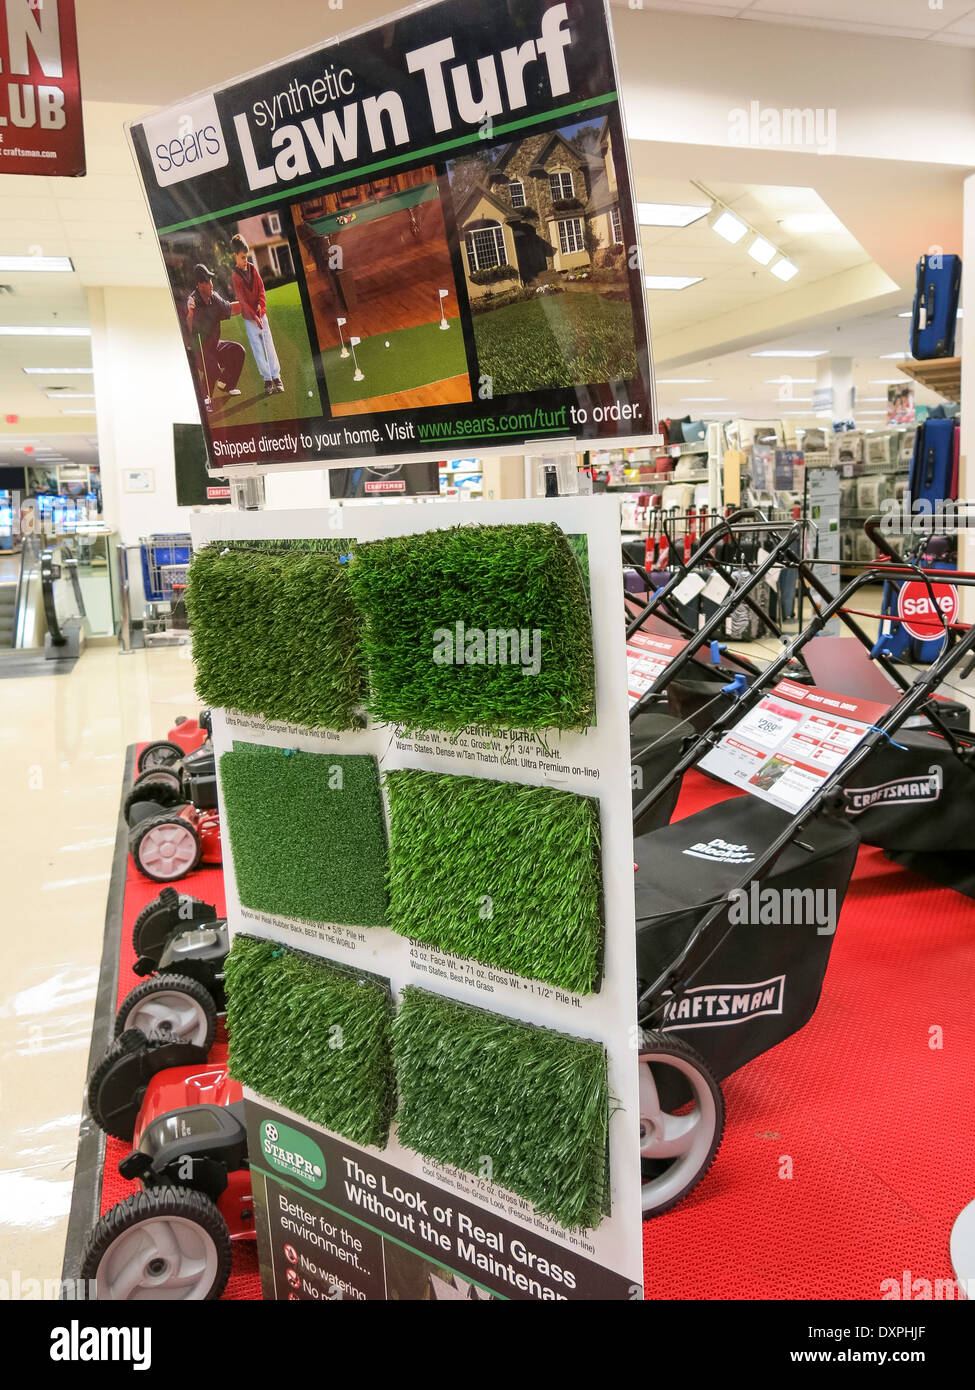 Grass Cutting and Turf Maintenance Display, Sears Store, WestShore Plaza, Tampa, FL, USA Stock Photo